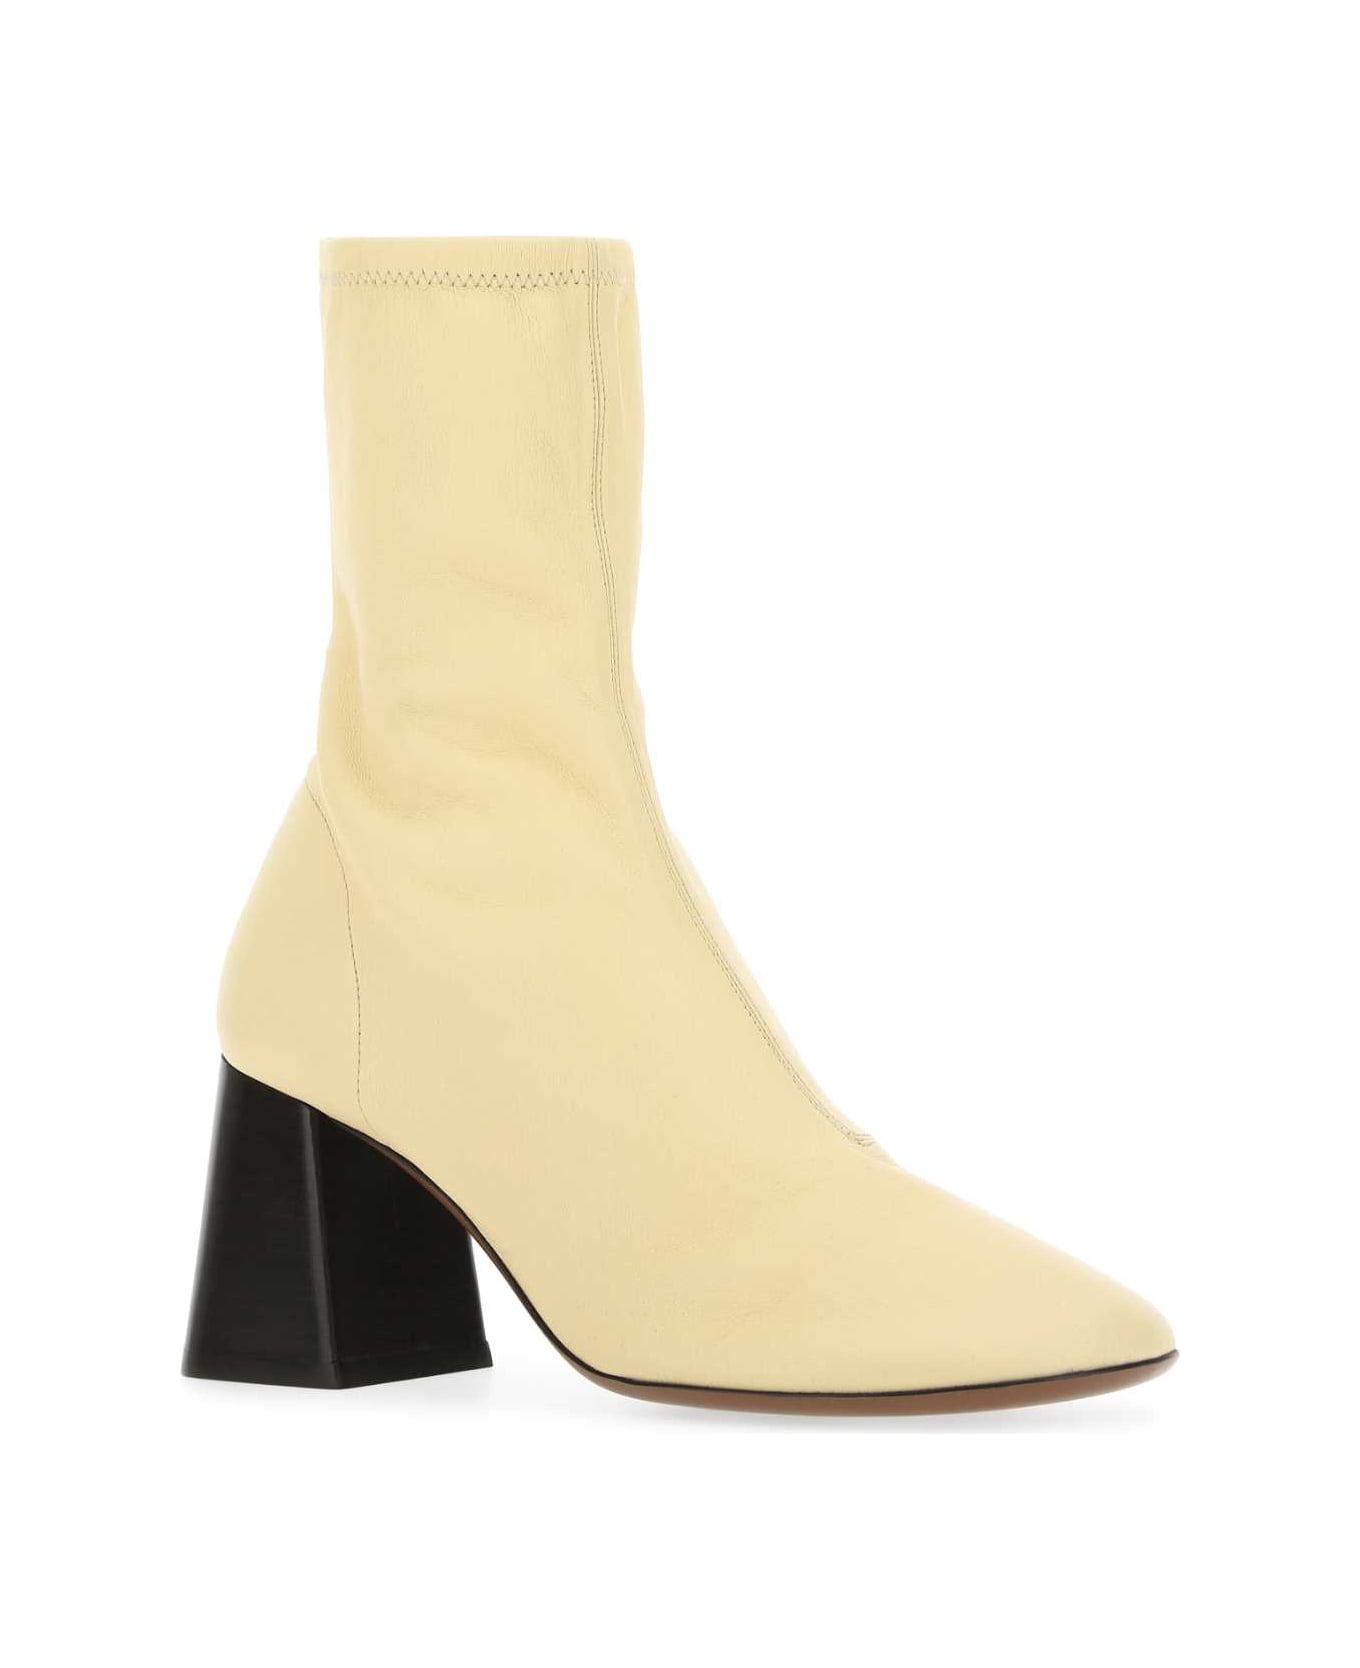 Neous Cream Leather Lepus Ankle Boots - ALABASTER